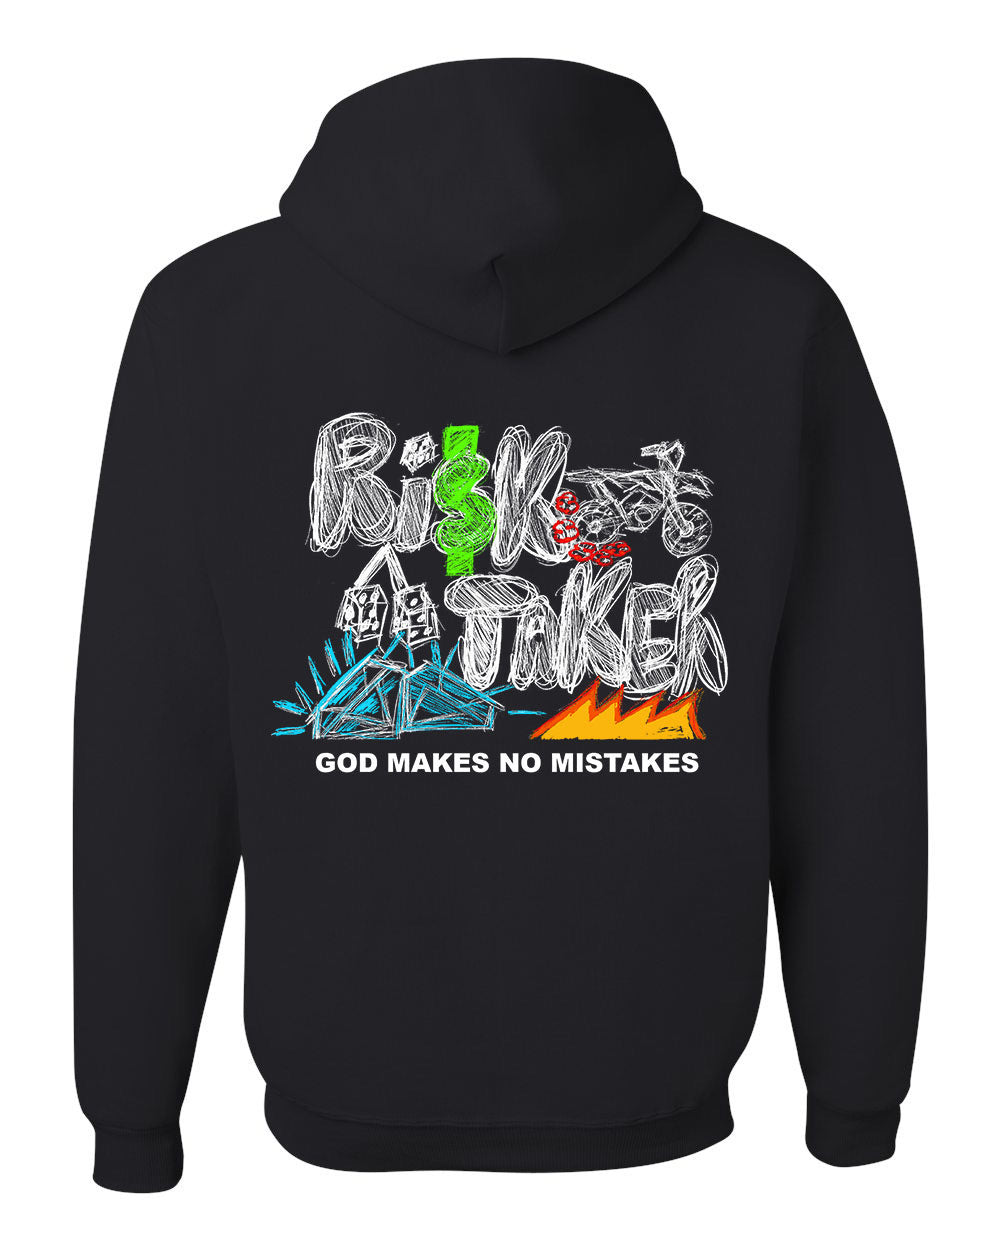 Indore Collection Risk Taker Lifestyle Hoodie -Black